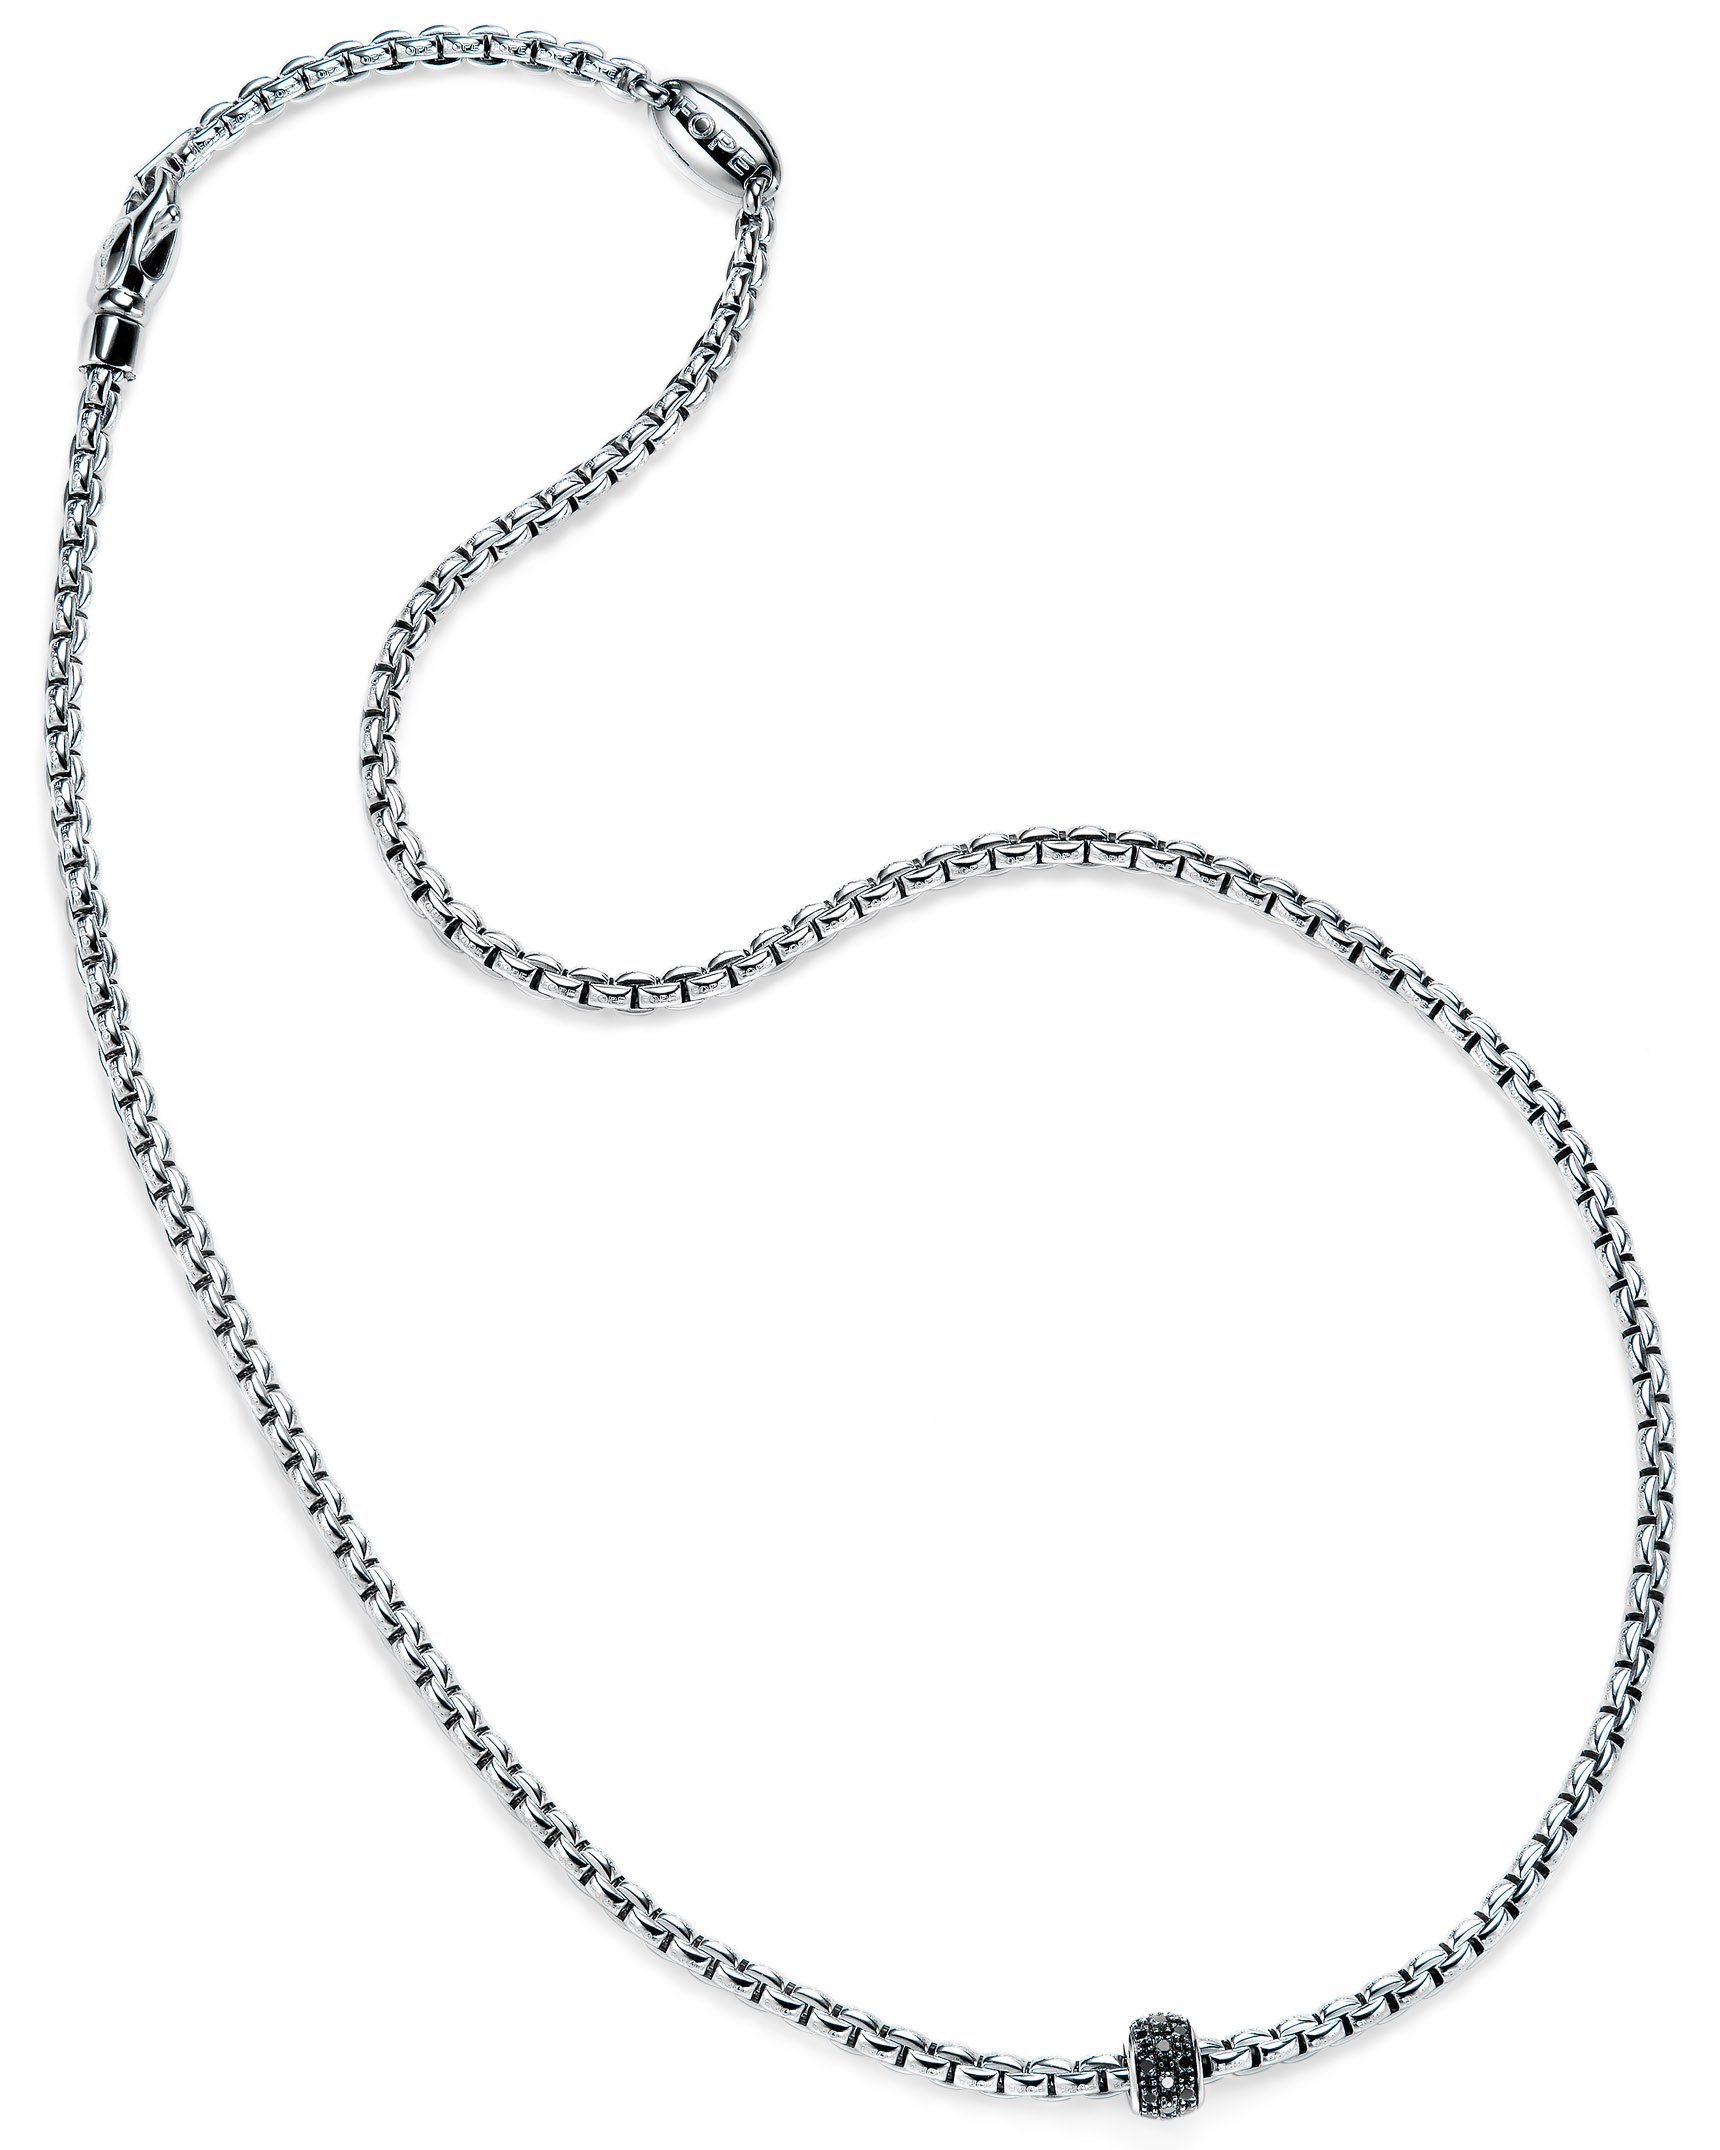 White Gold and Black Diamond Rondel Rope Chain Necklace by Fope - Turgeon  Raine